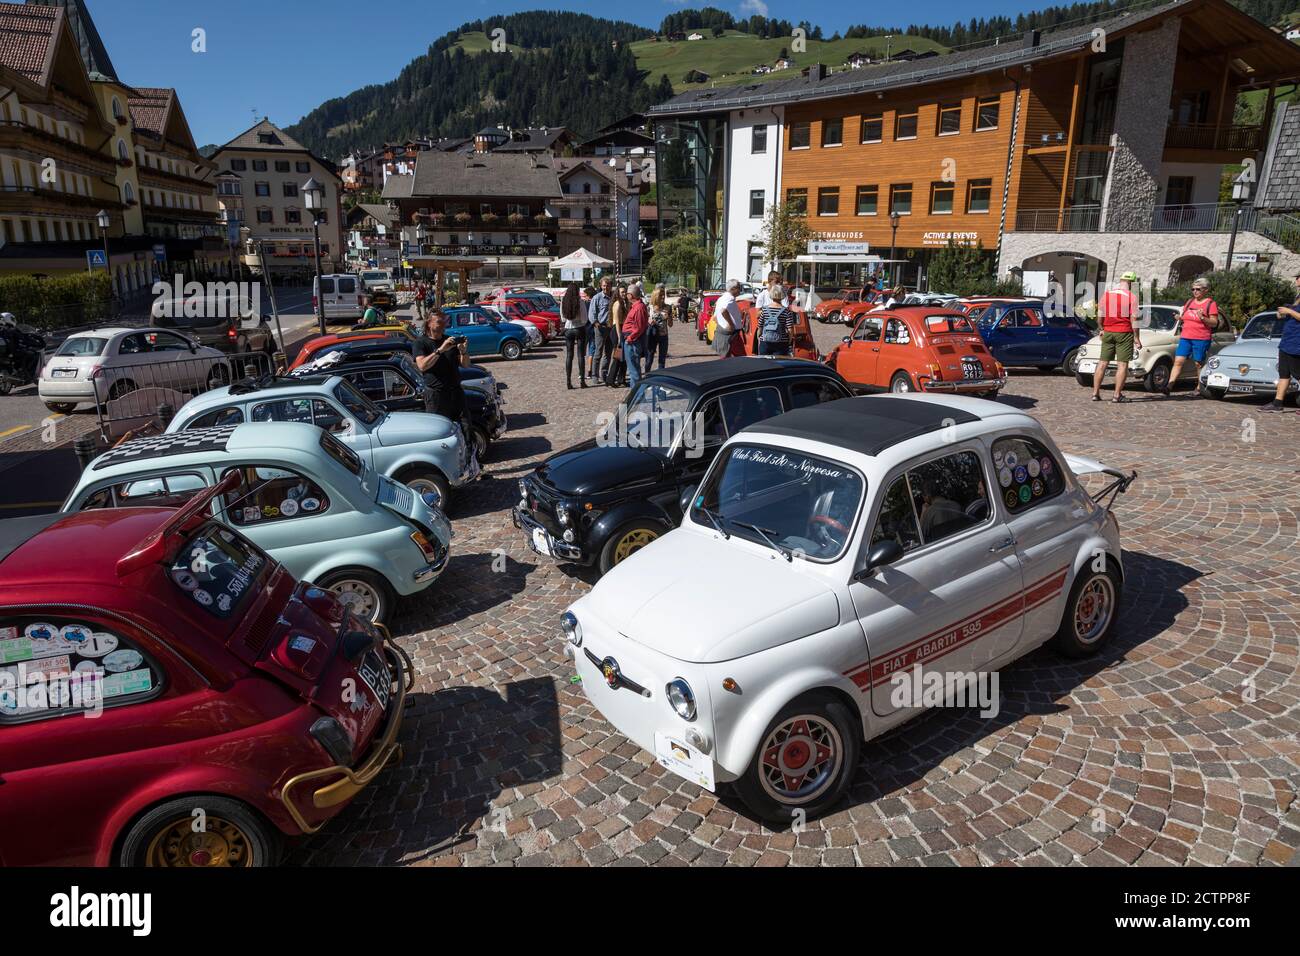 A rally of vintage Fiat 500 cars parks up in the village square of Selva Val Gardena, Italy. Stock Photo